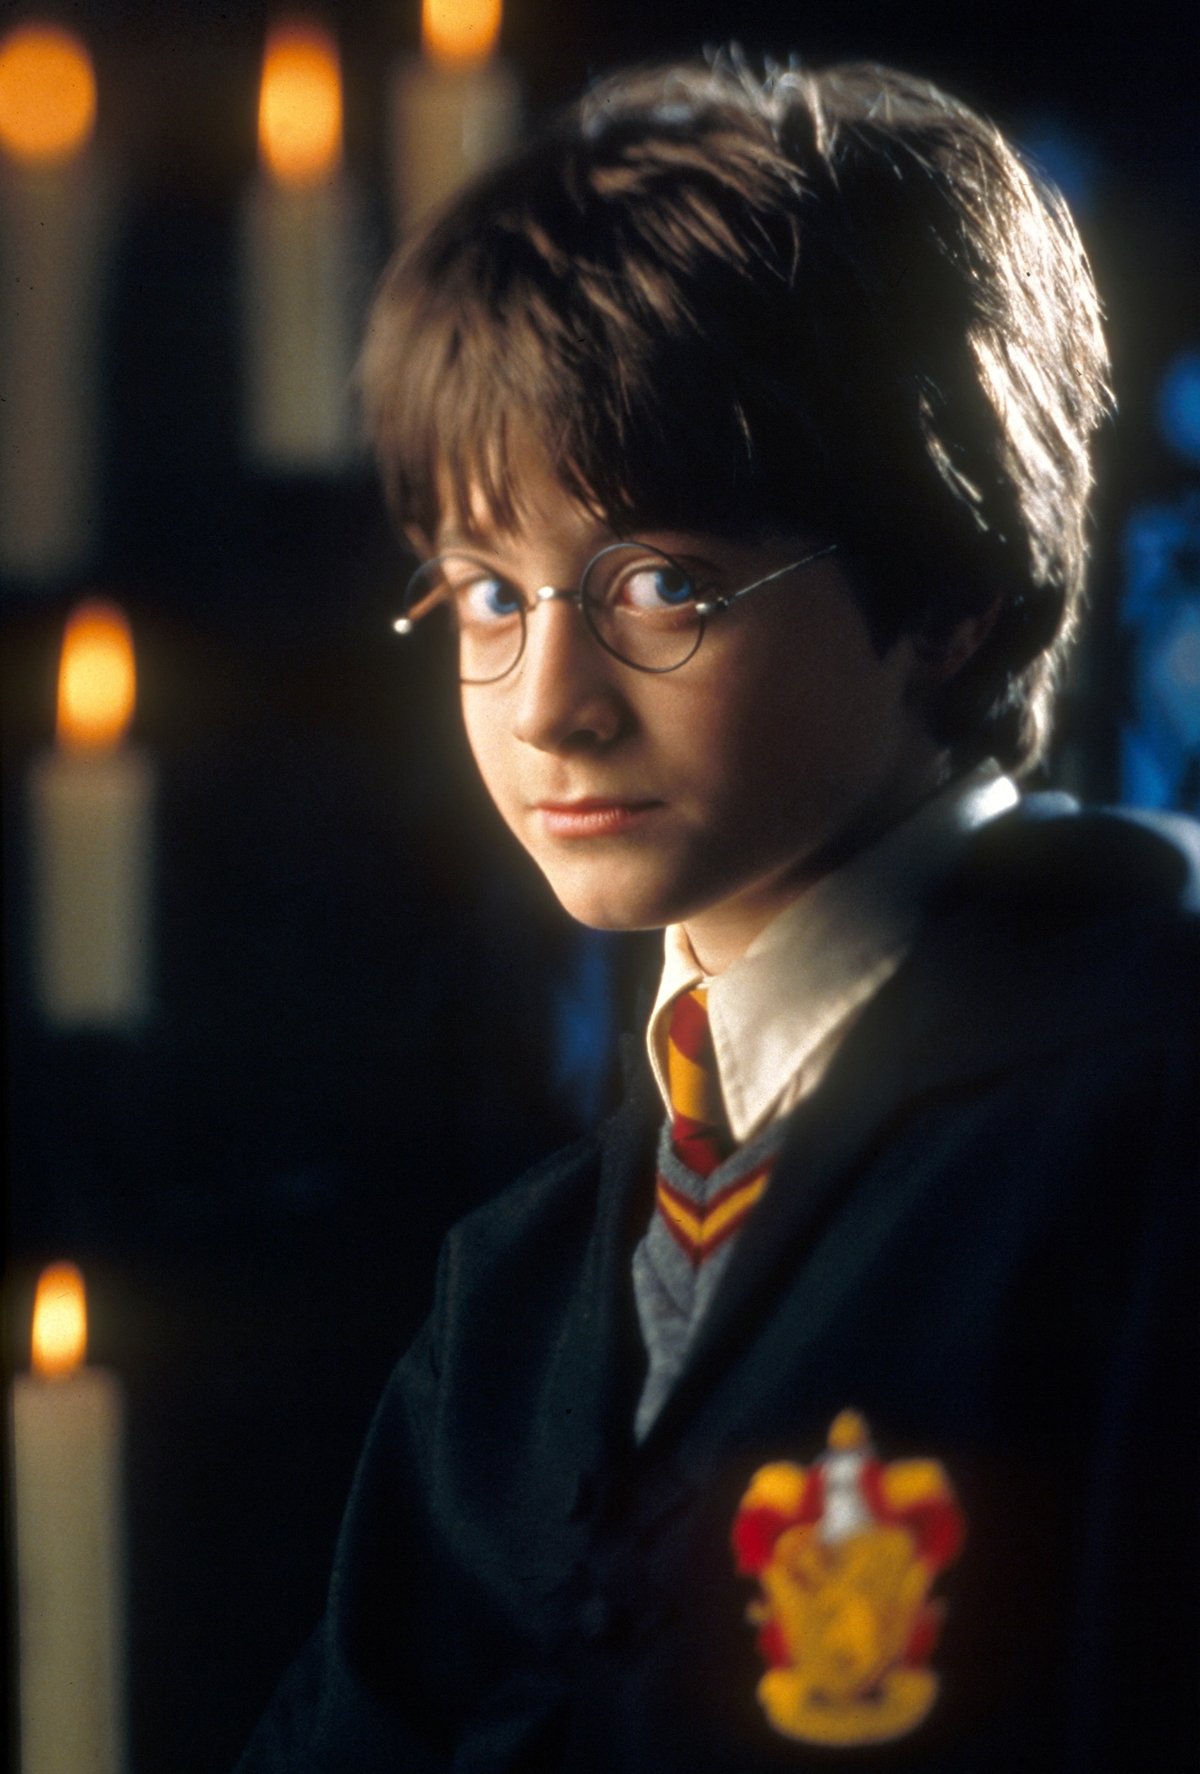 Daniel Radcliffe was 12 years old when the first Harry Potter movie based on J. K. Rowling's 1997 novel of the same name premiered in November 2001